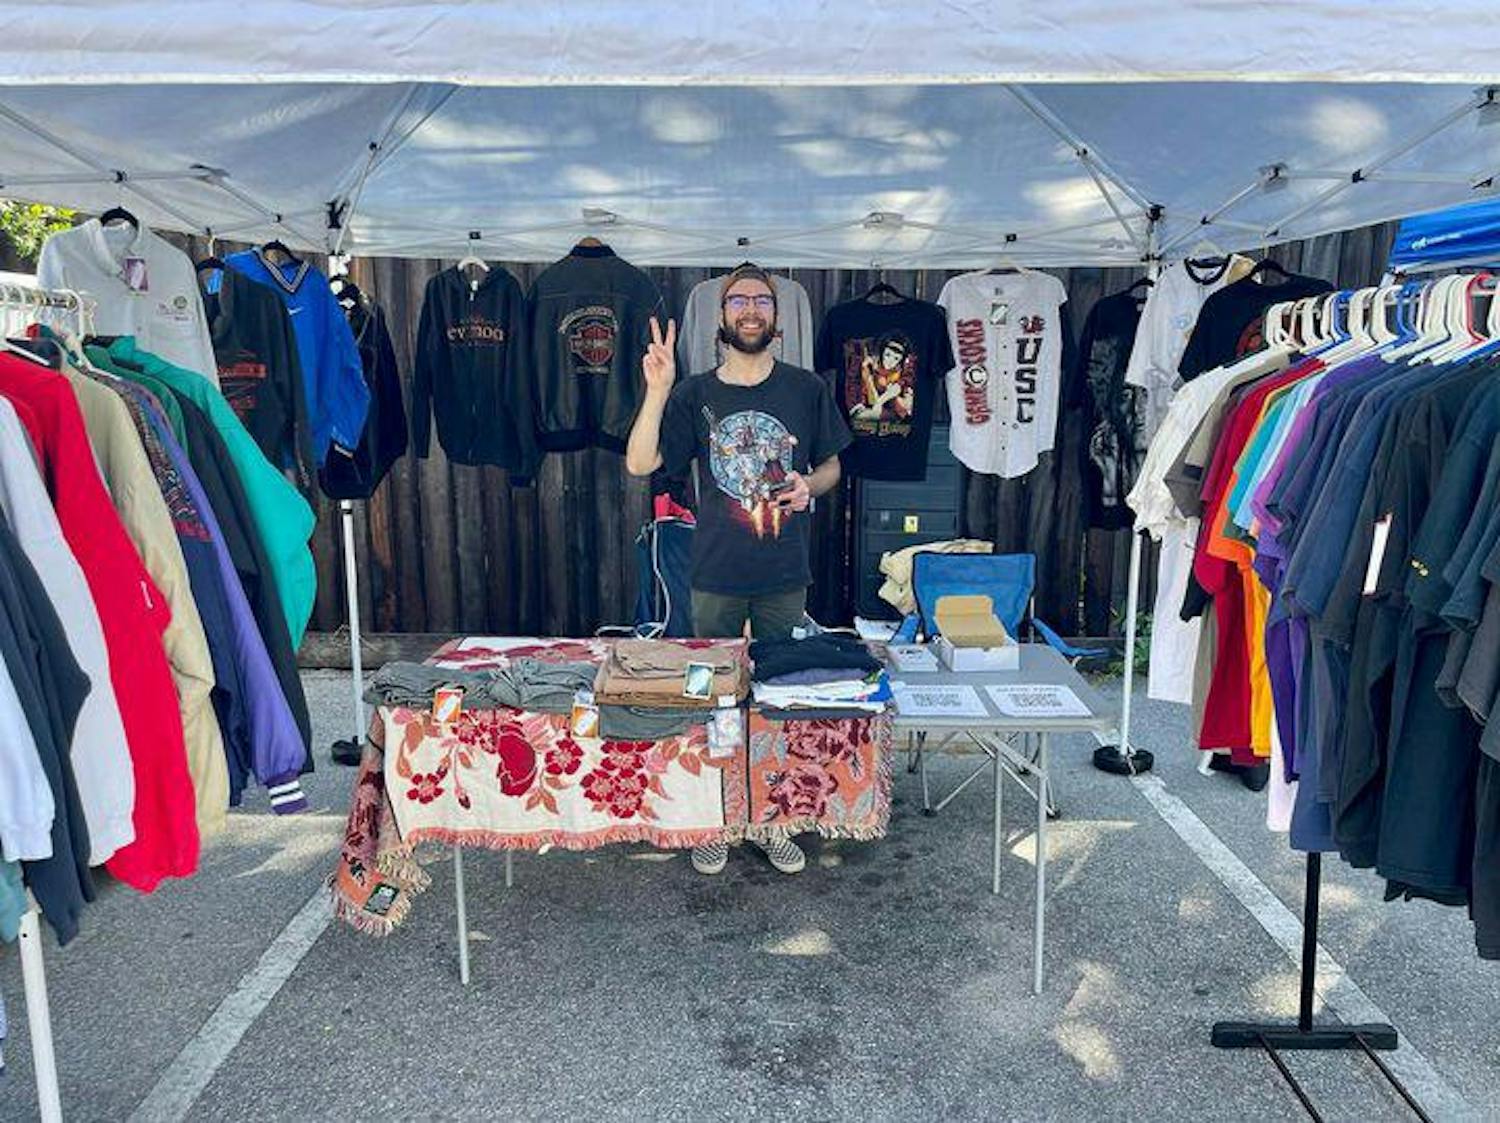 Josh Rogers poses for a picture at Snips Vintage during a pop-up thrift fair in October. The Gamecock Vintage Market aims to unite vendors from all over both North and South Carolina with 鶹С򽴫ý students who are looking to thrift in a sustainable way.